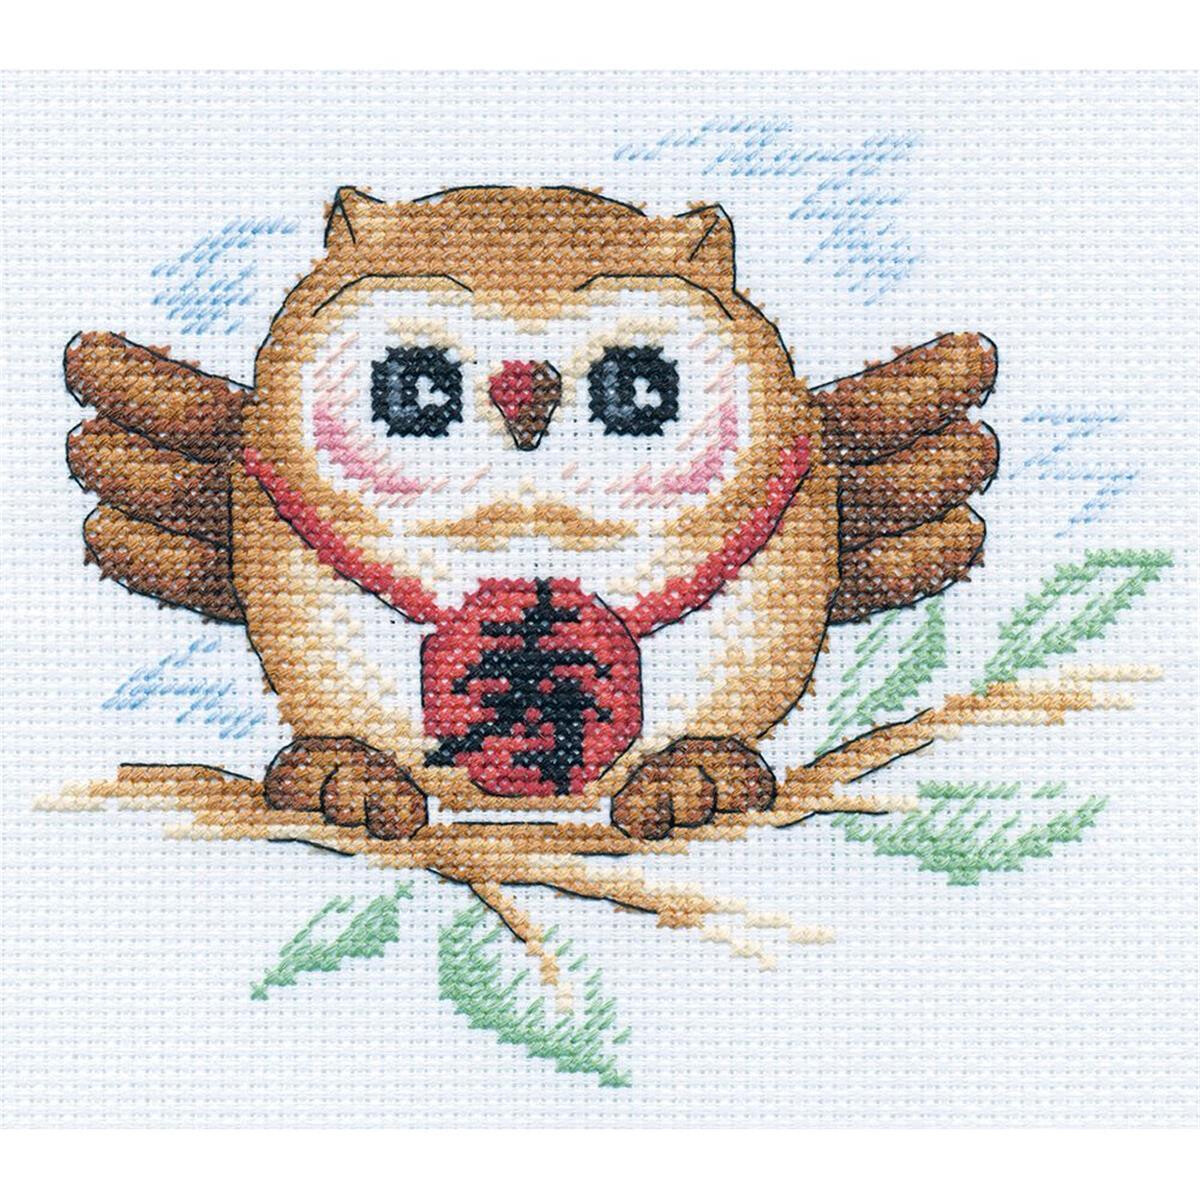 Panna counted cross stitch kit "Owl .Wisdom and Long...